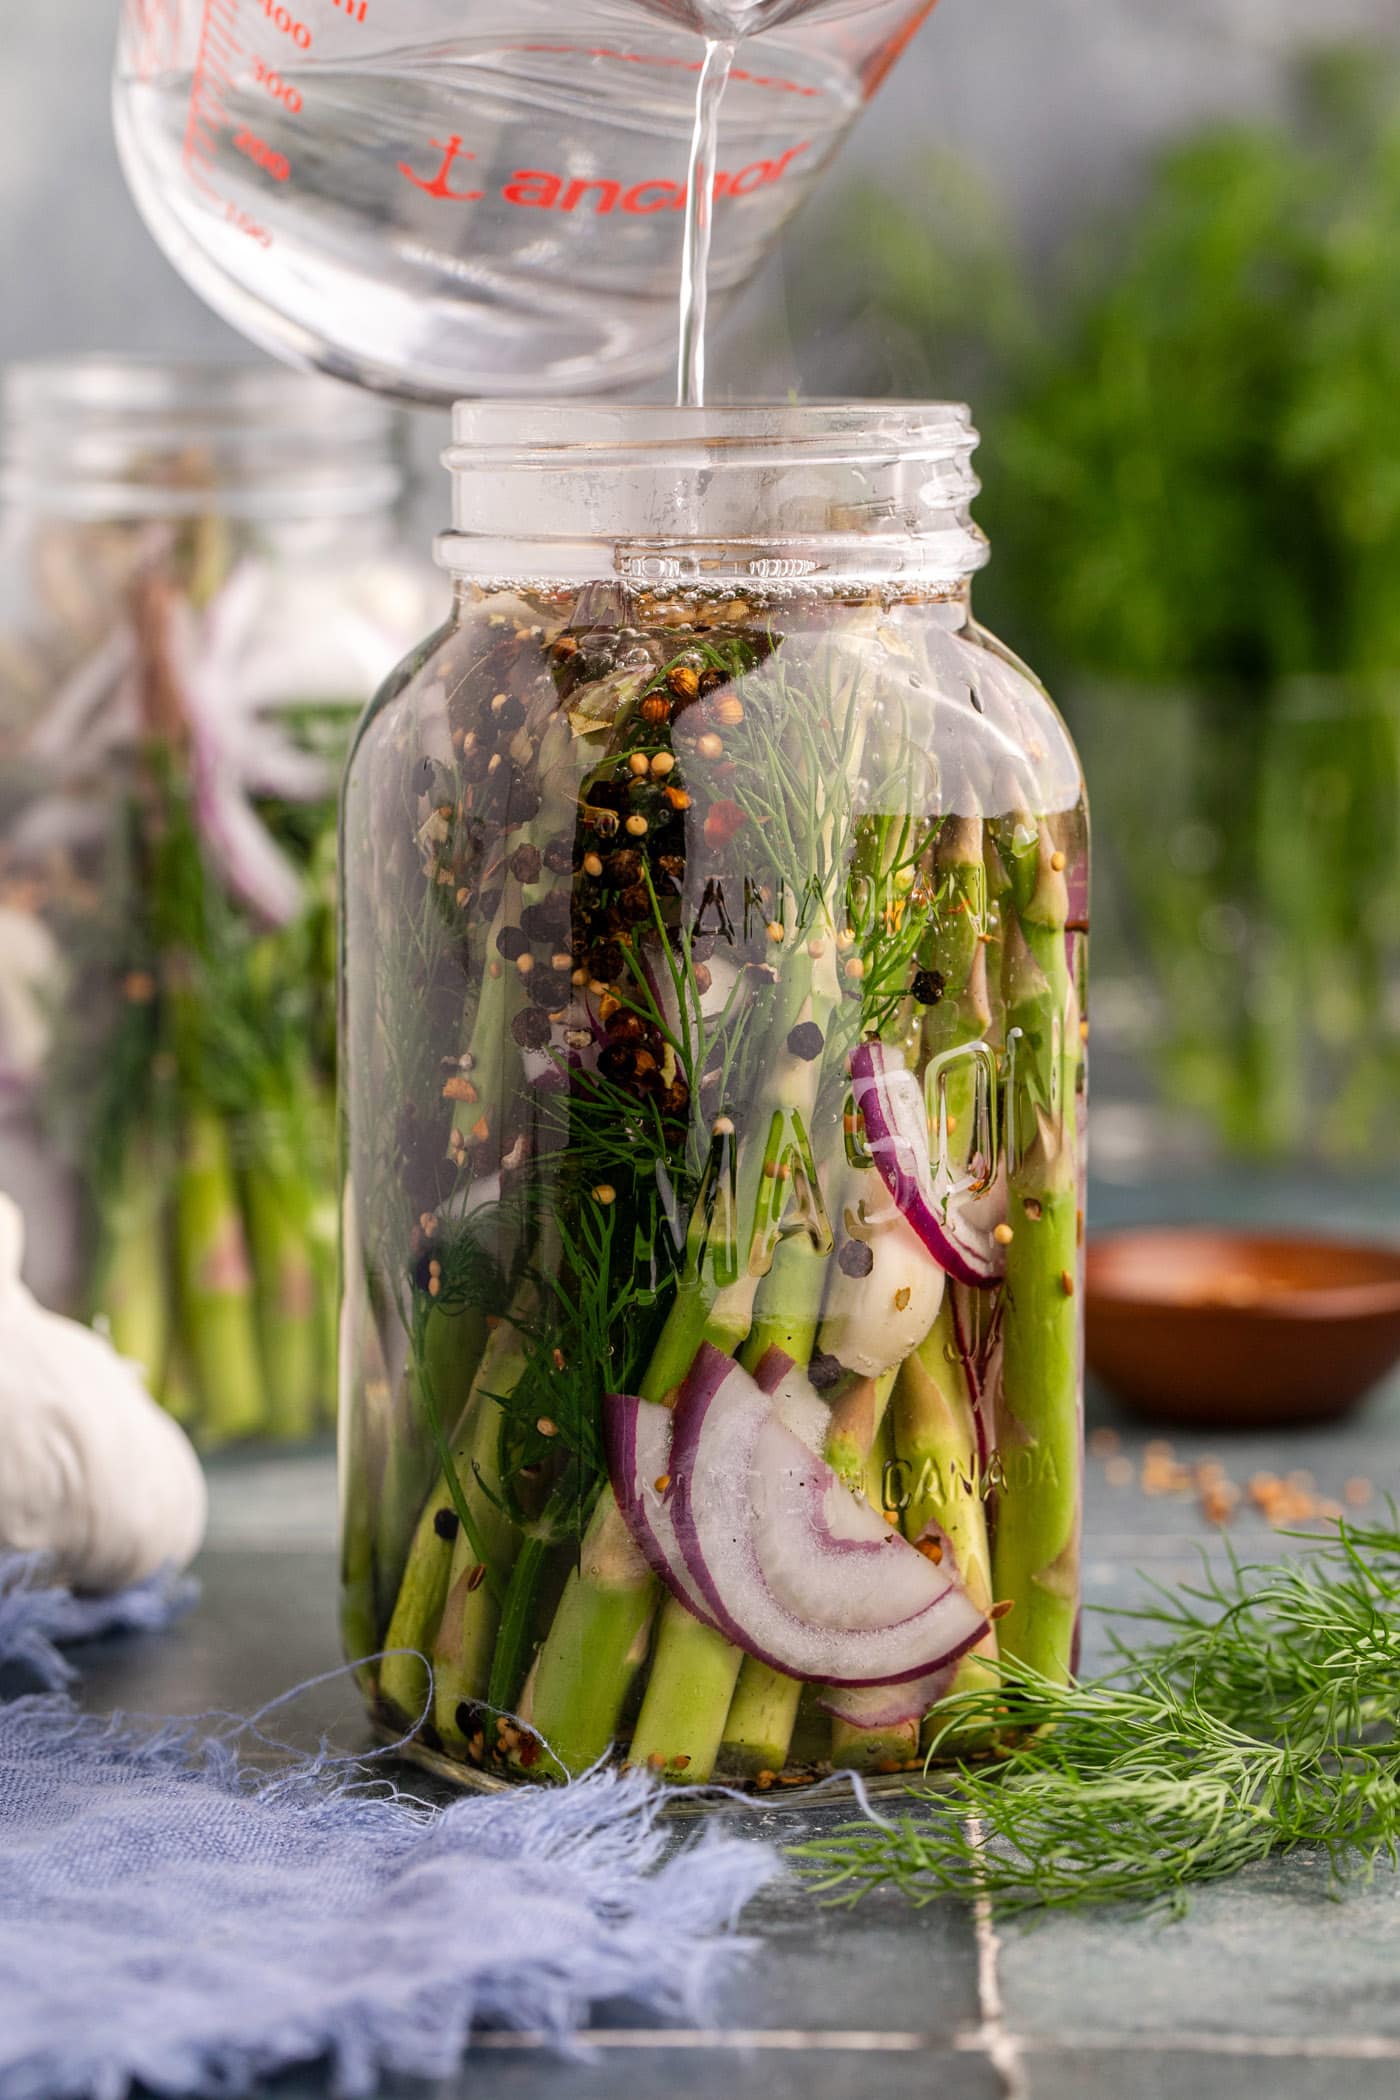 pouring vinegar brine over asparagus, red onion, garlic, and dill